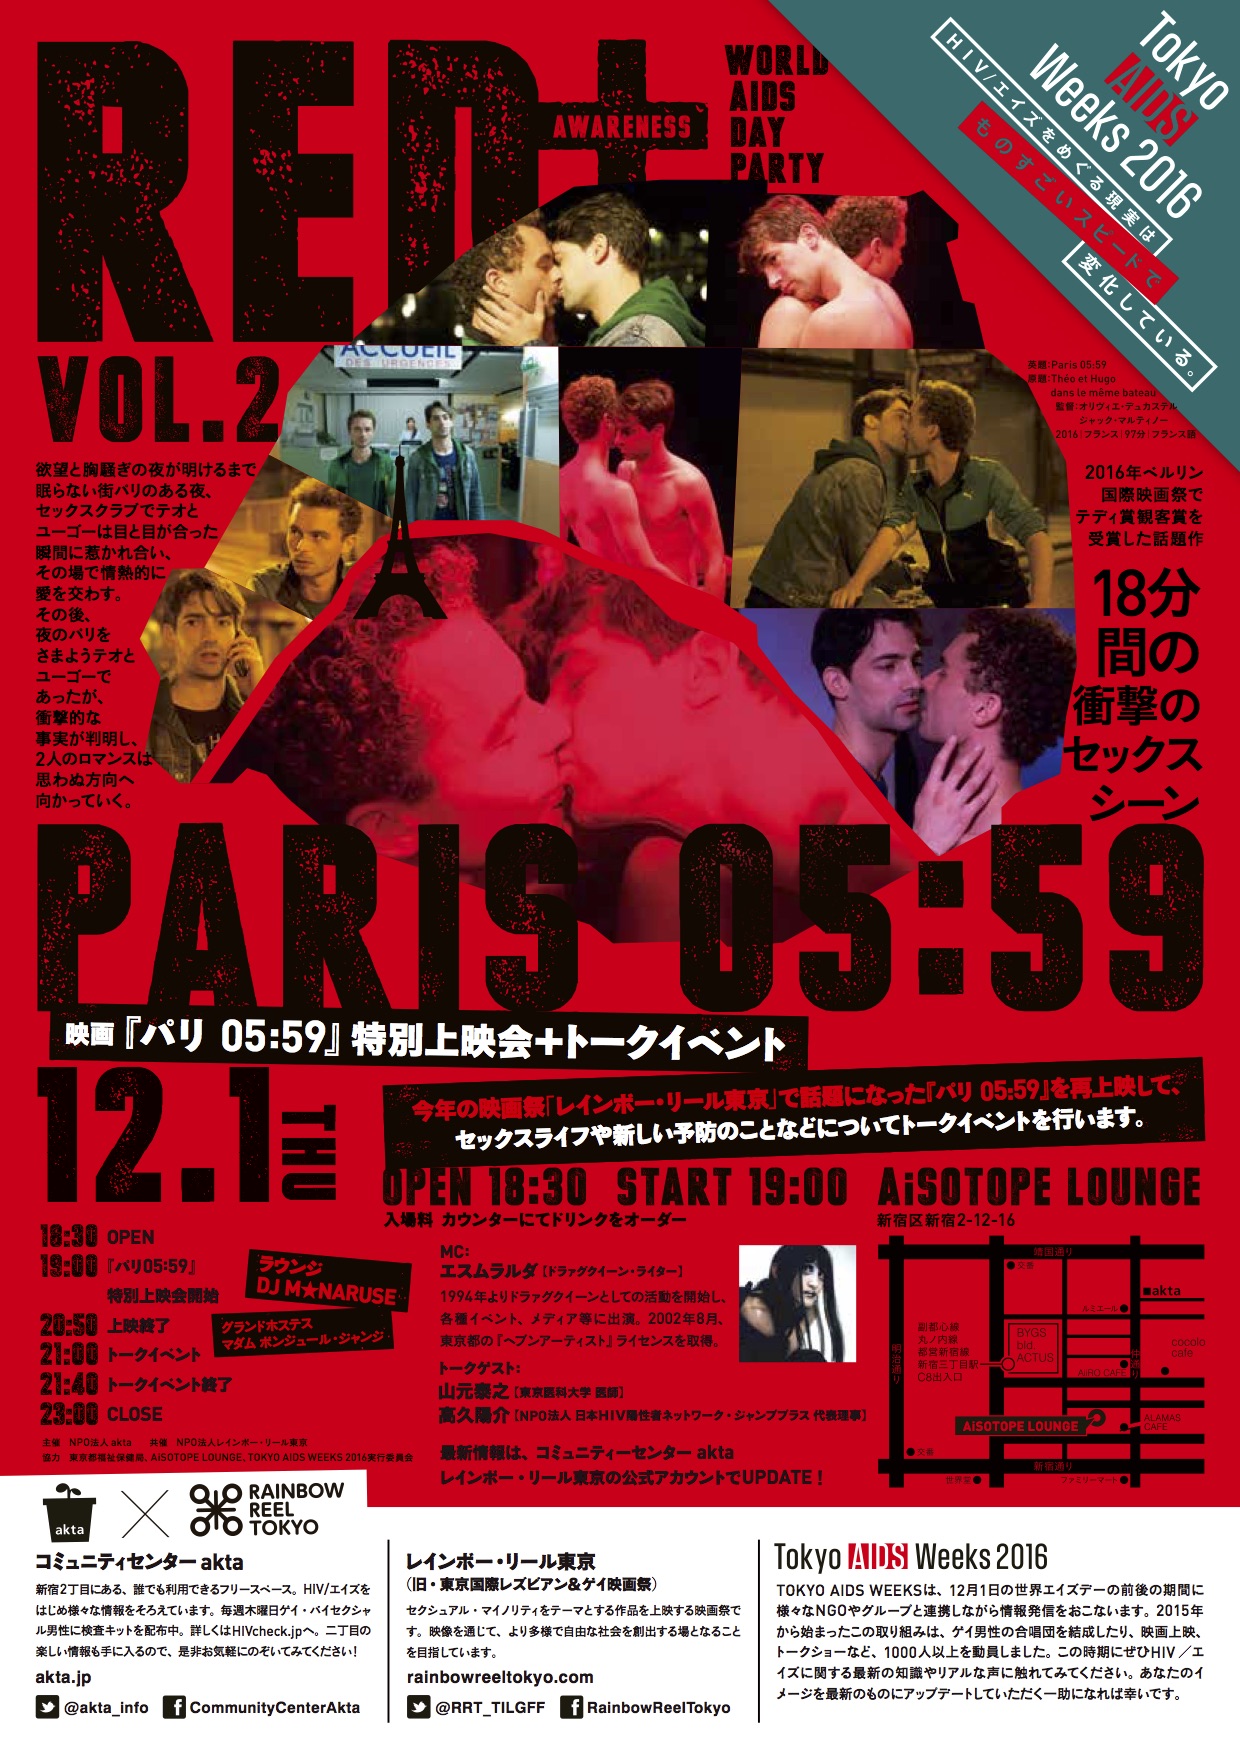 WORLD AIDS DAY PARTY「RED awareness vol.2」 　映画「パリ05:59」特別上映会 ＋ トークイベント